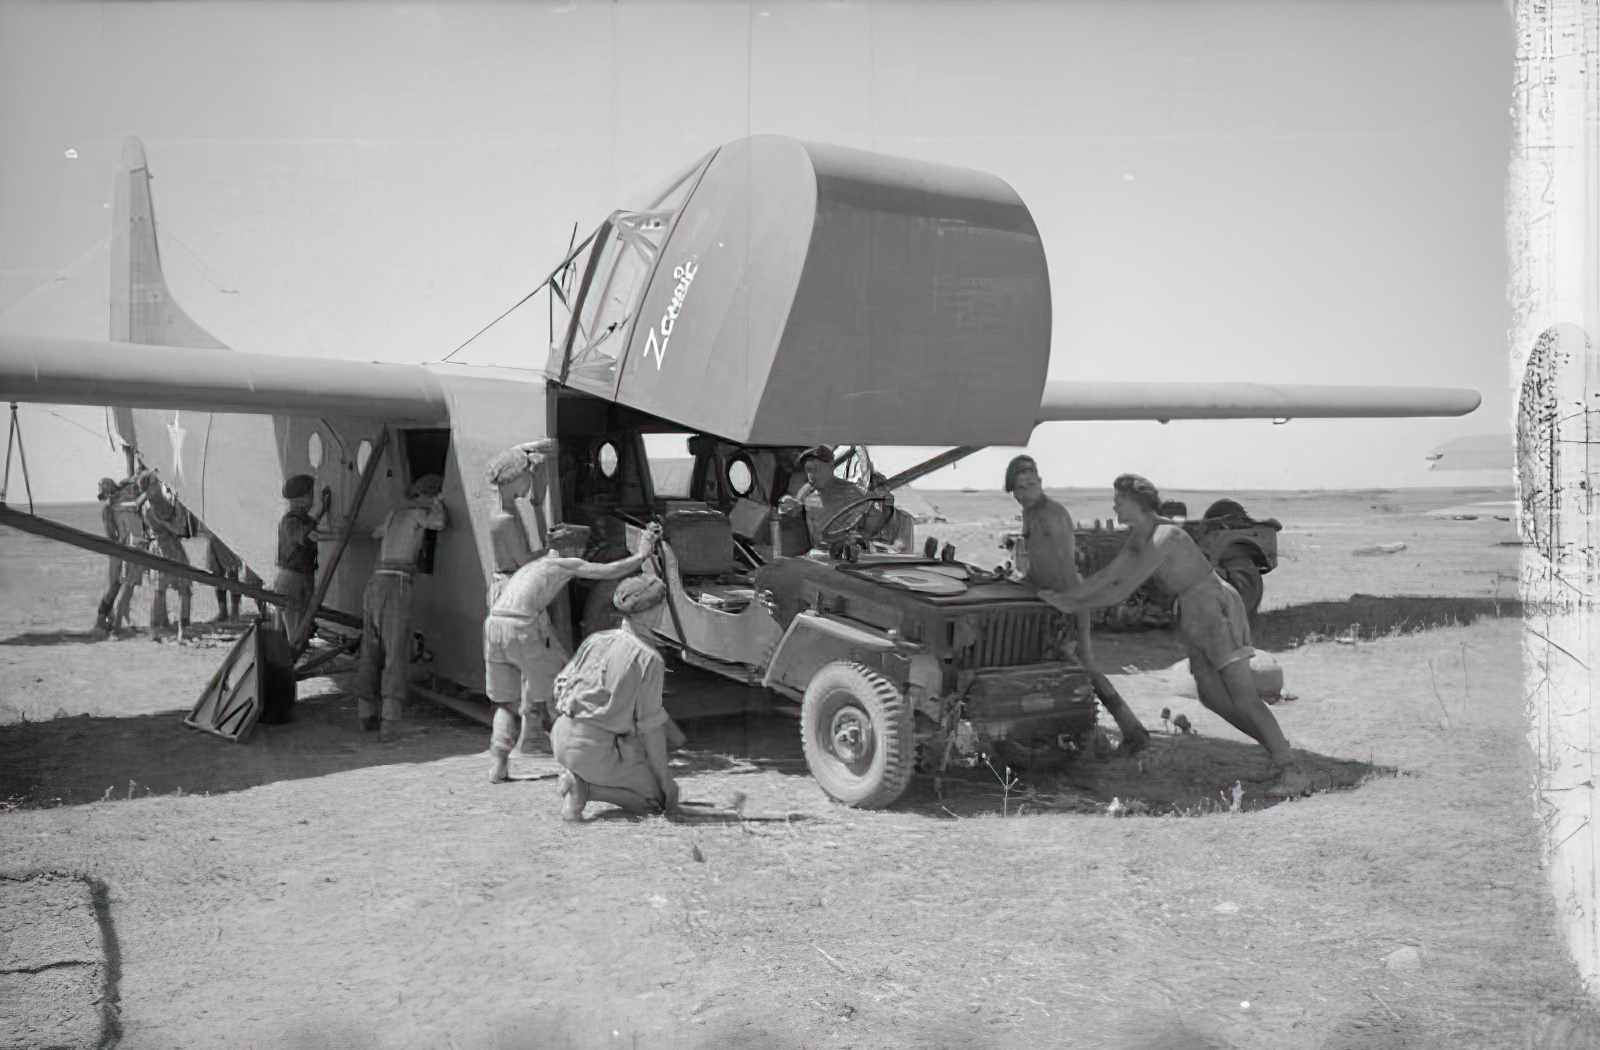 THE CAMPAIGN IN SICILY 1943. Planning and Preparations January - July 1943: A jeep is loaded onto an American WACO CG-4A glider